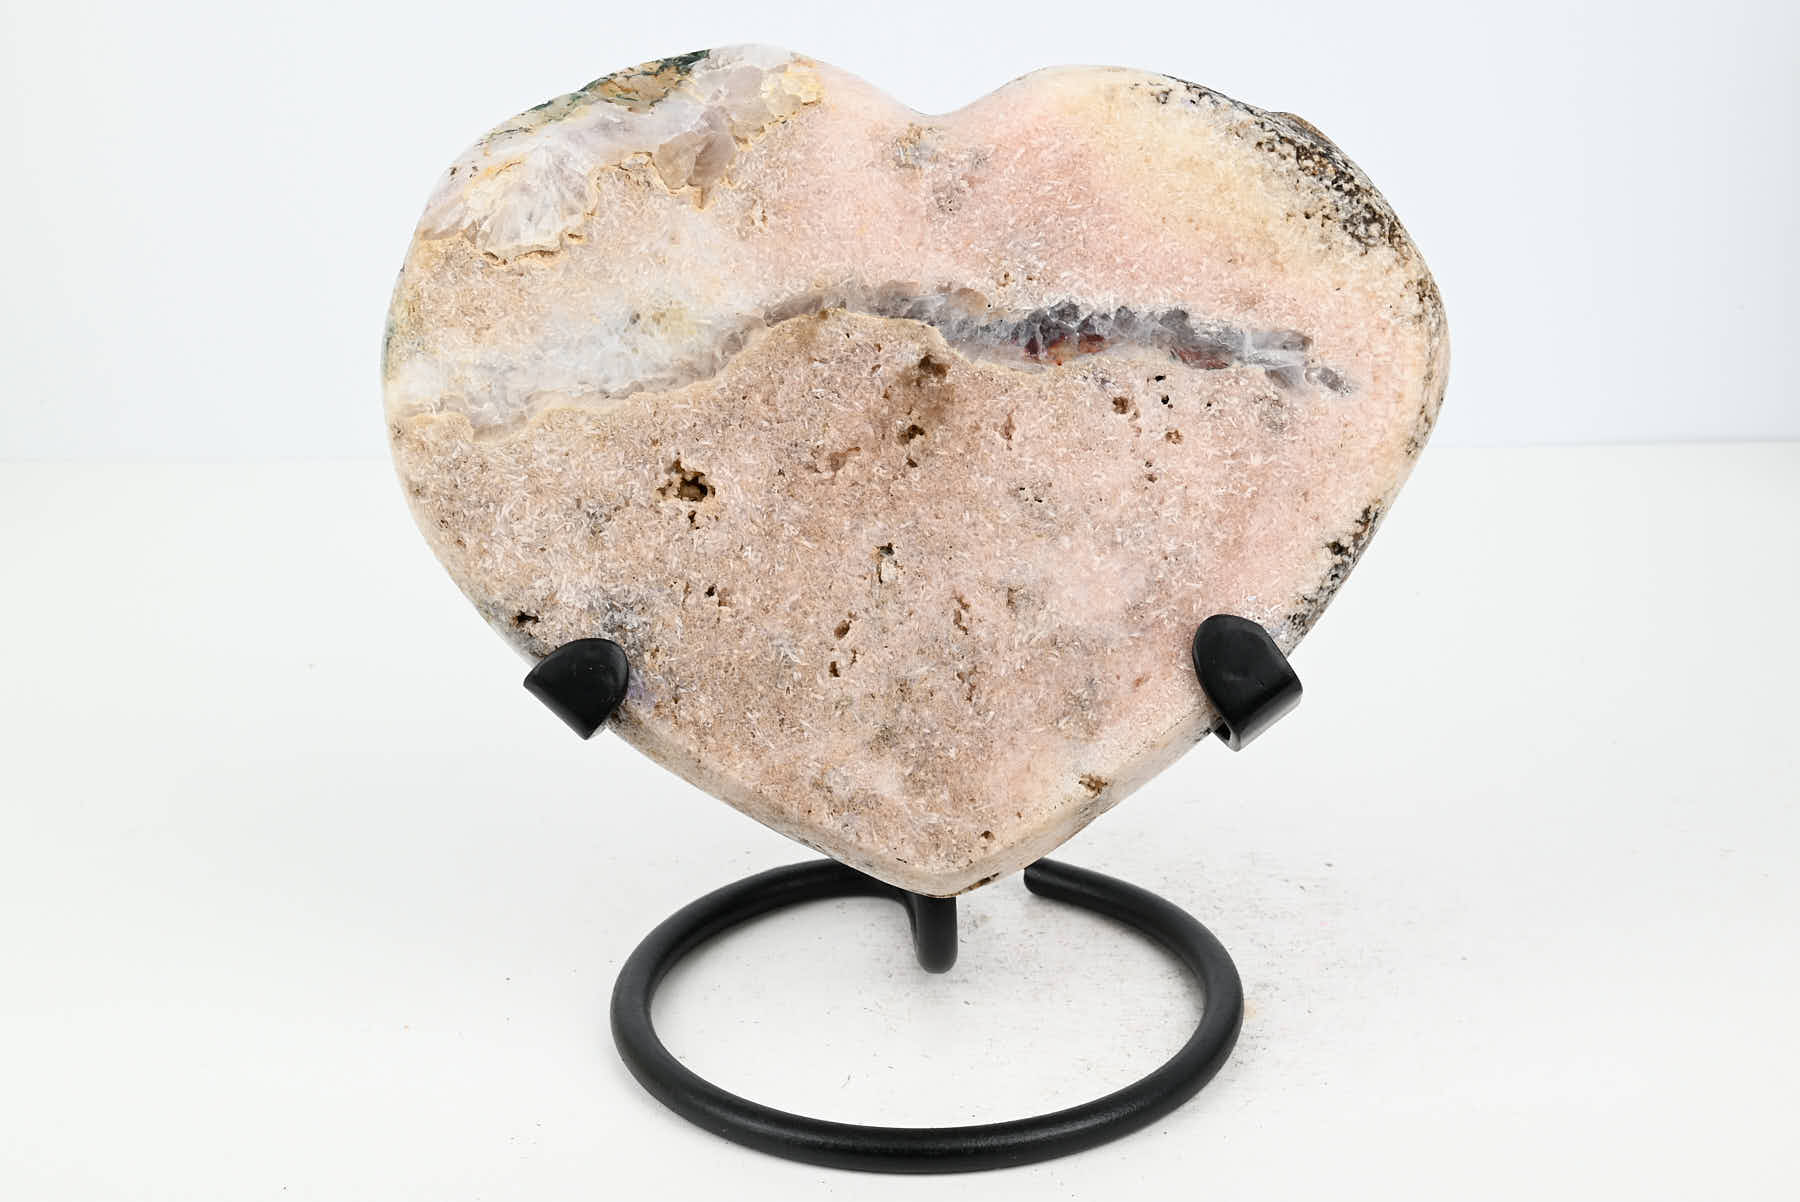 Extra Quality Pink Amethyst Heart - 2.15kg, 18cm high - #HTPINK-34020